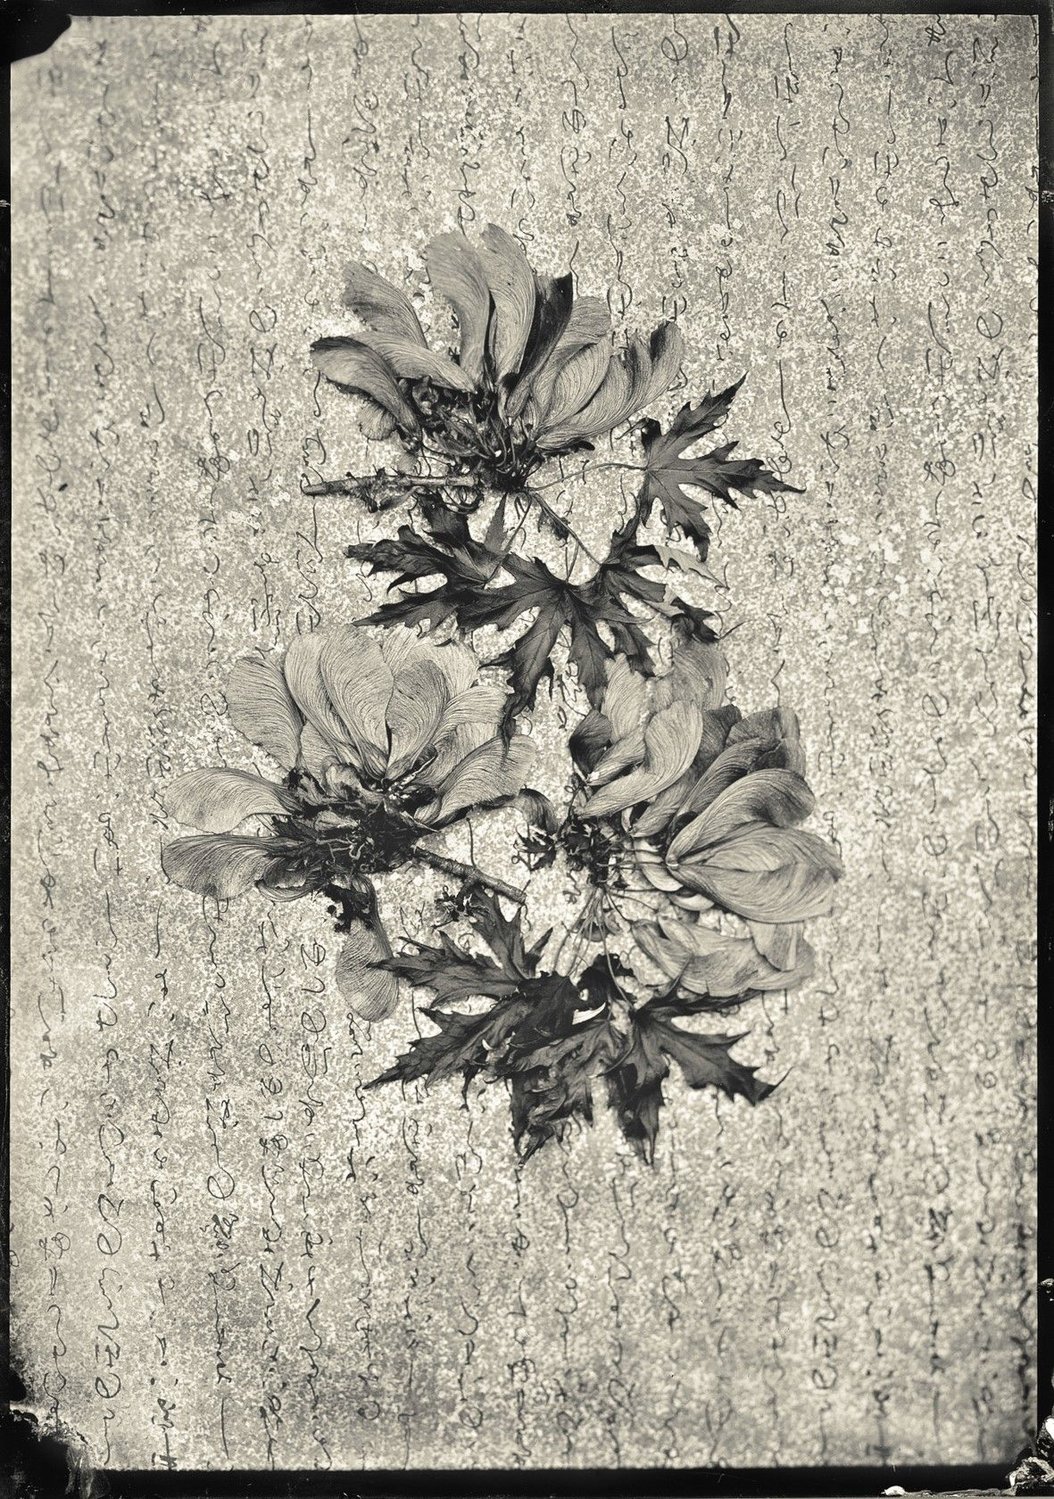 “Maple Leaf Study,” by Claudia Rippee, is a wet plate collodion tintype.